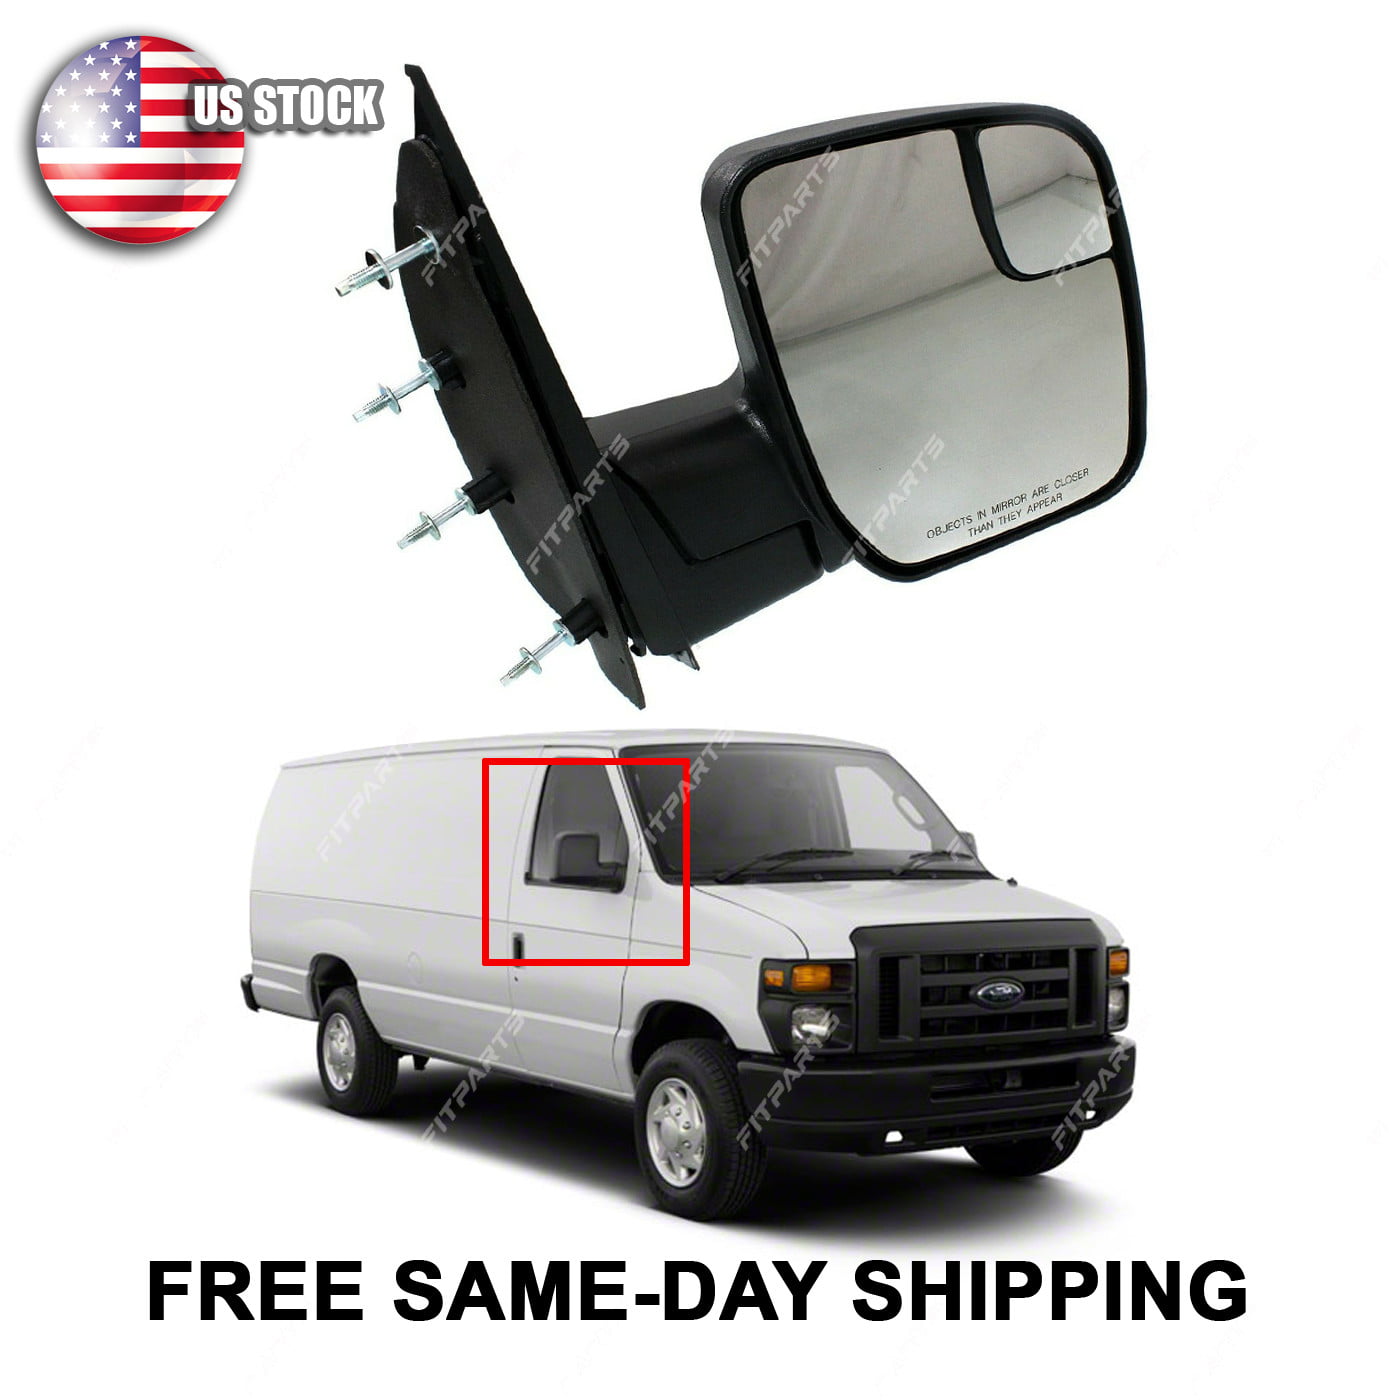 Manual Passenger Right Side RH Mirror for 2010-2014 Ford F150 F250 F350 F450 - Walmart.com 2014 Ford F 250 Passenger Side Mirror